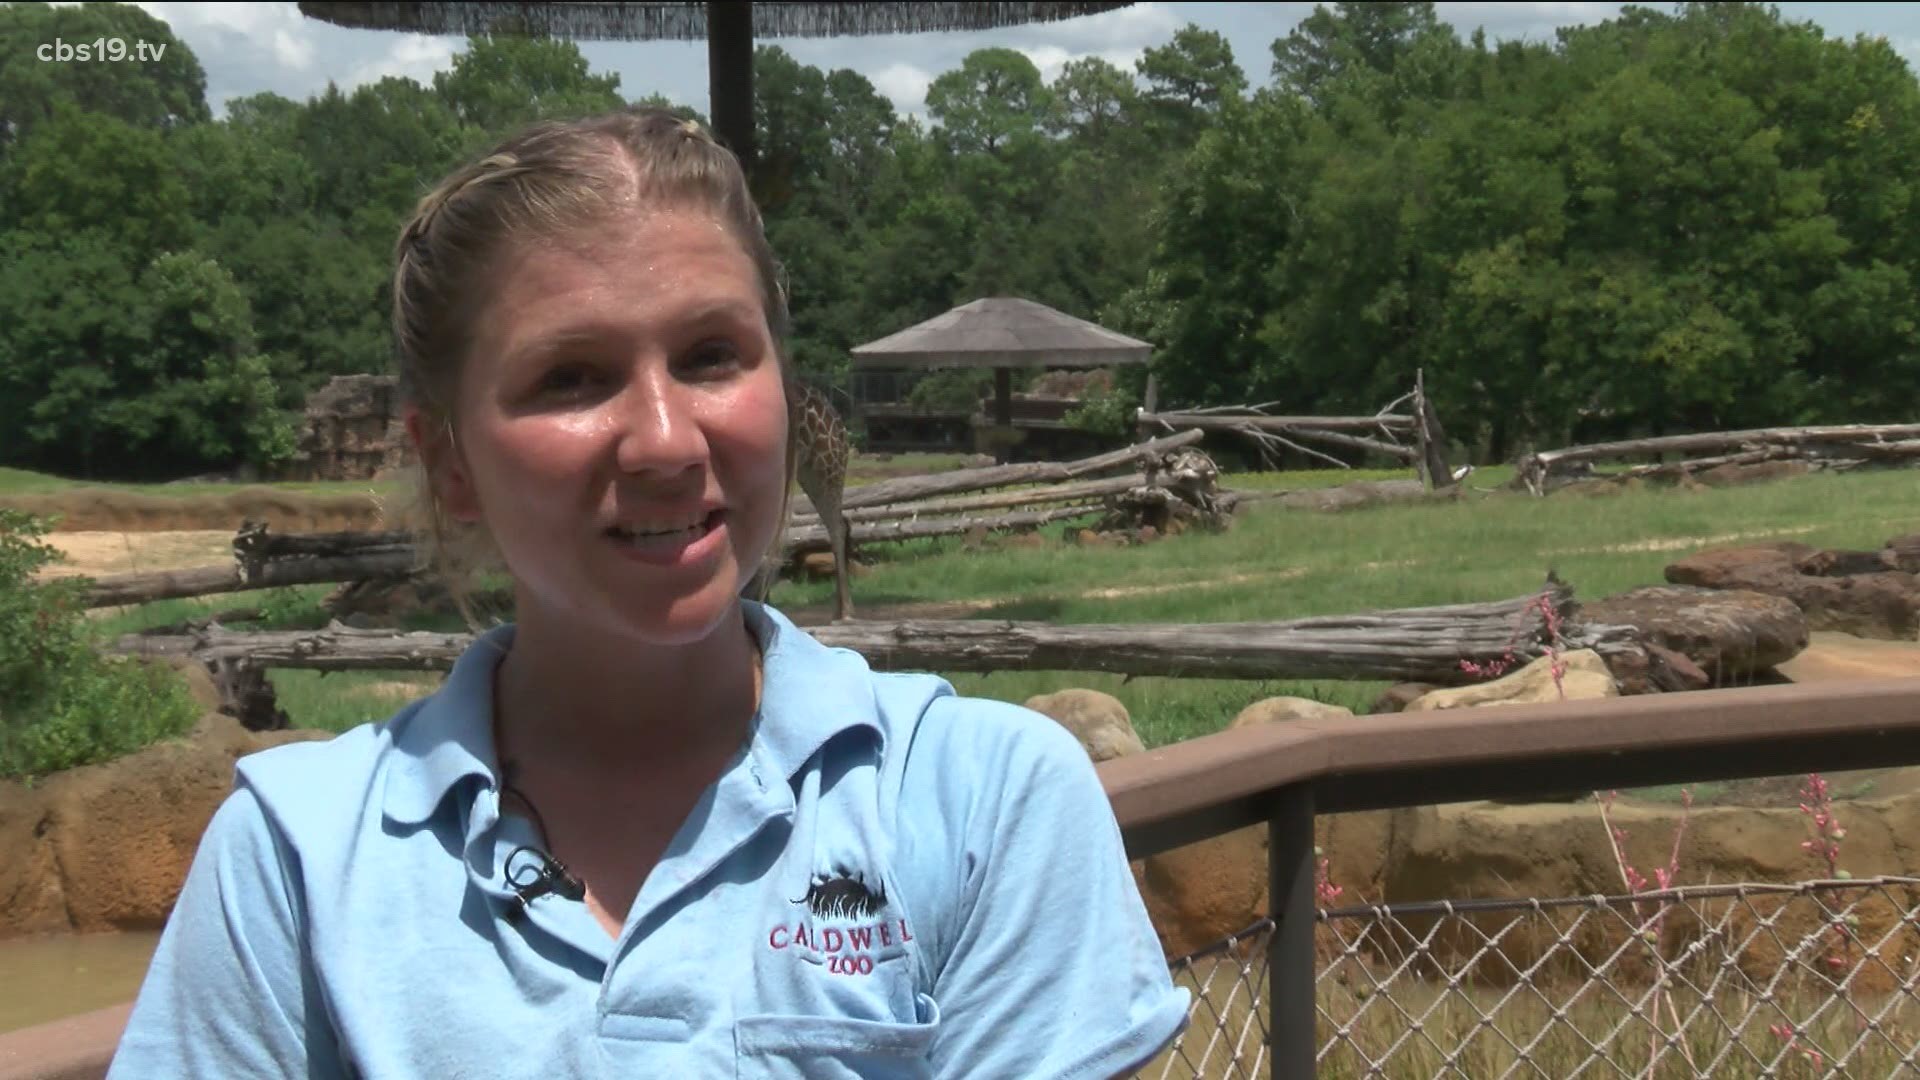 "I think it’s amazing that we are actually being recognized because we do put a lot of hard work into our jobs," one zookeeper said.